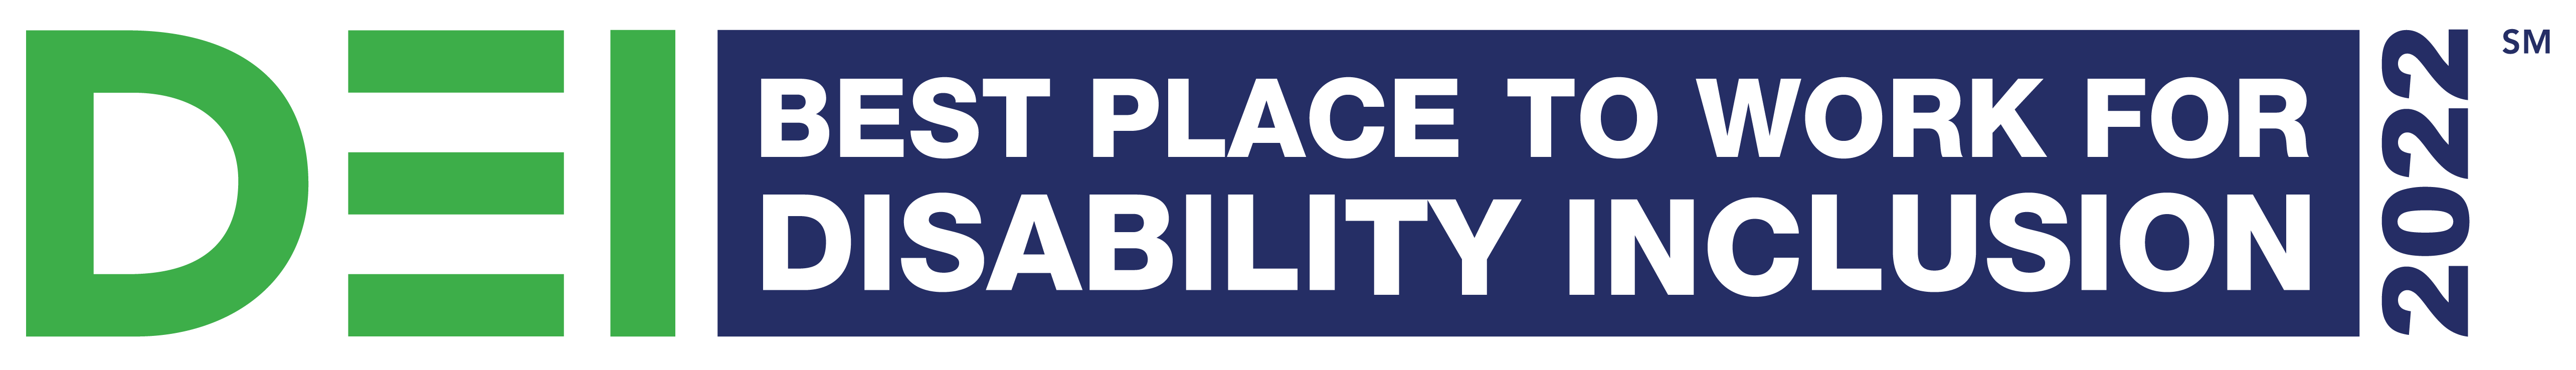 2022 Best Places to Work™ for Disability Inclusion logo